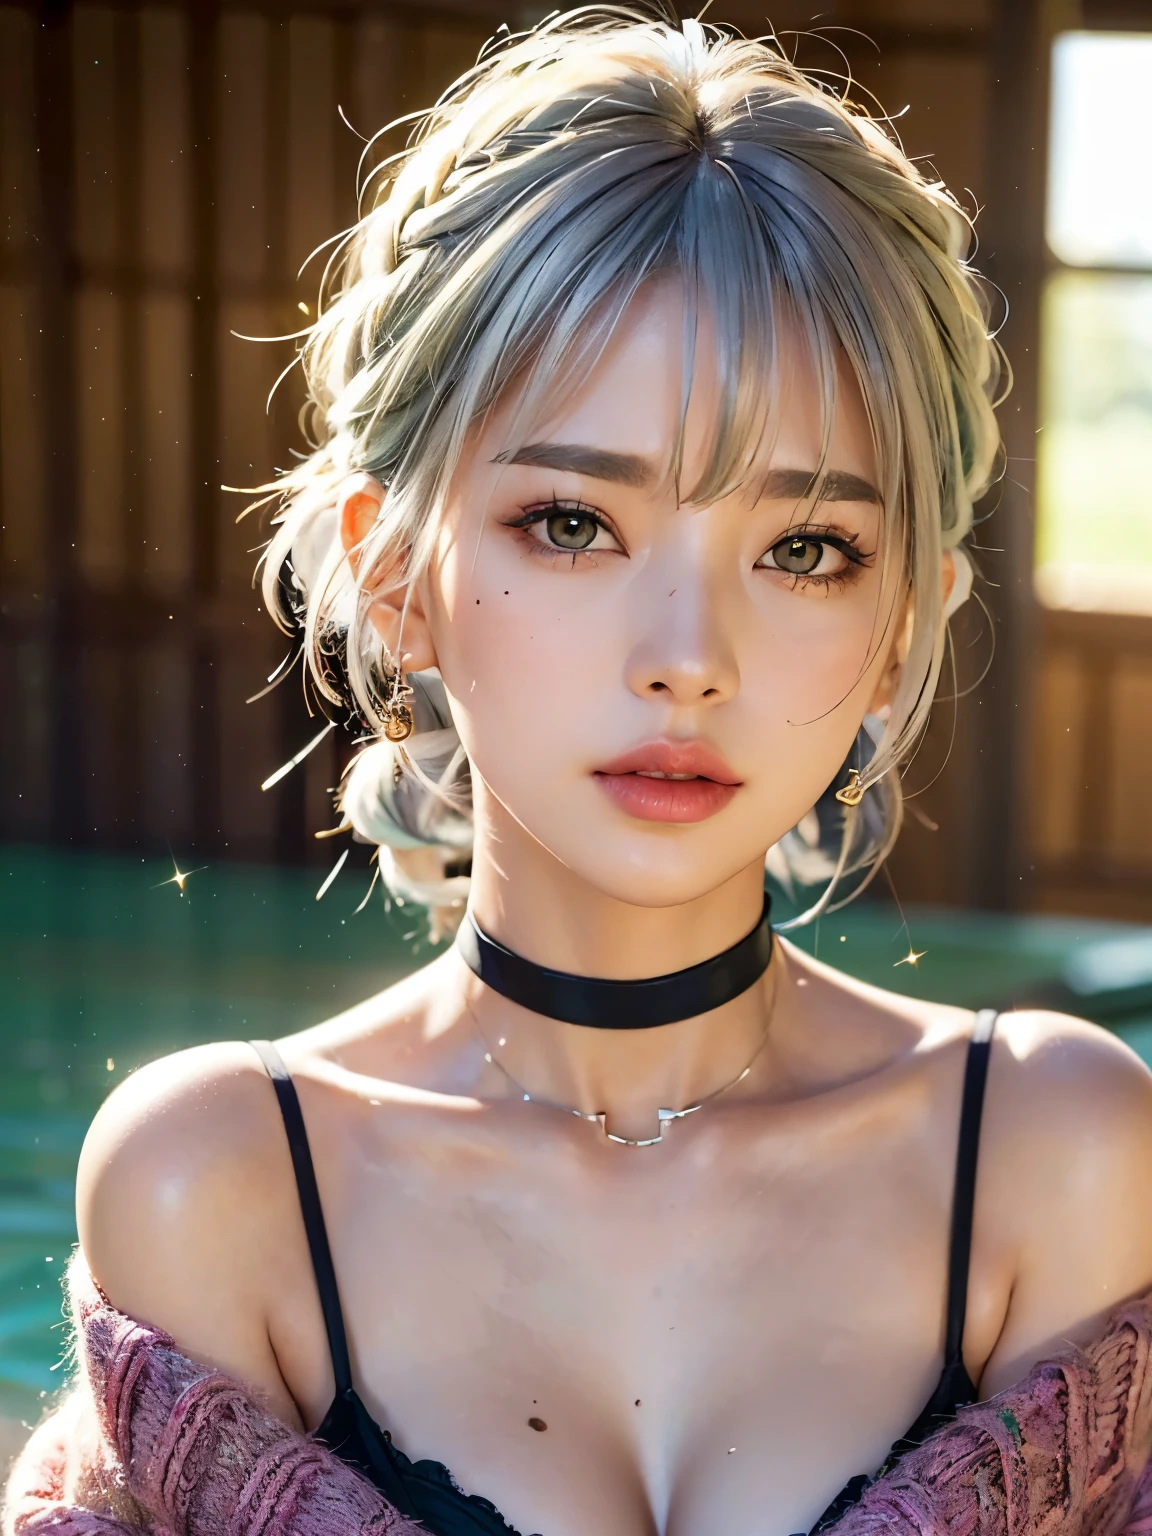 One girl, alone, soLightingary, high quaLightingy, (best quaLightingy,4K,8K,High resolution,masterpiece:1.2),Super detailed,(Realistic,photoRealistic,photo-Realistic:1.37),Gorgeous Hair,Gray Hair,short hair with bangs,Sharp eyes,目の下のmole,Fuller lips,jewelry,(Skin with attention to detail:1.4),(Rim Light:1.3),(Lighting:1.3),(sunny day:1.3),Portraiture,Beautiful Lips,Bob Haircut,A seductive gaze,mole,Casual clothing,Colorful clothing,close,Bob Hair,Choker Necklace,Bright Eyes,bangs,fringe,Dimples on the cheeks,Dimples,platinum Gray Hair,Gray Hair,Platinum Blonde Hair,black,Red lips,Red lipstick,Round lips,round Pouting,Pouting,Doinmake,Sparkly Makeup,gLightingter,contact lens,green,green,pink,purple,wine-red,highlight,Braid,colored highlight,Beanie,Braiding,Braid